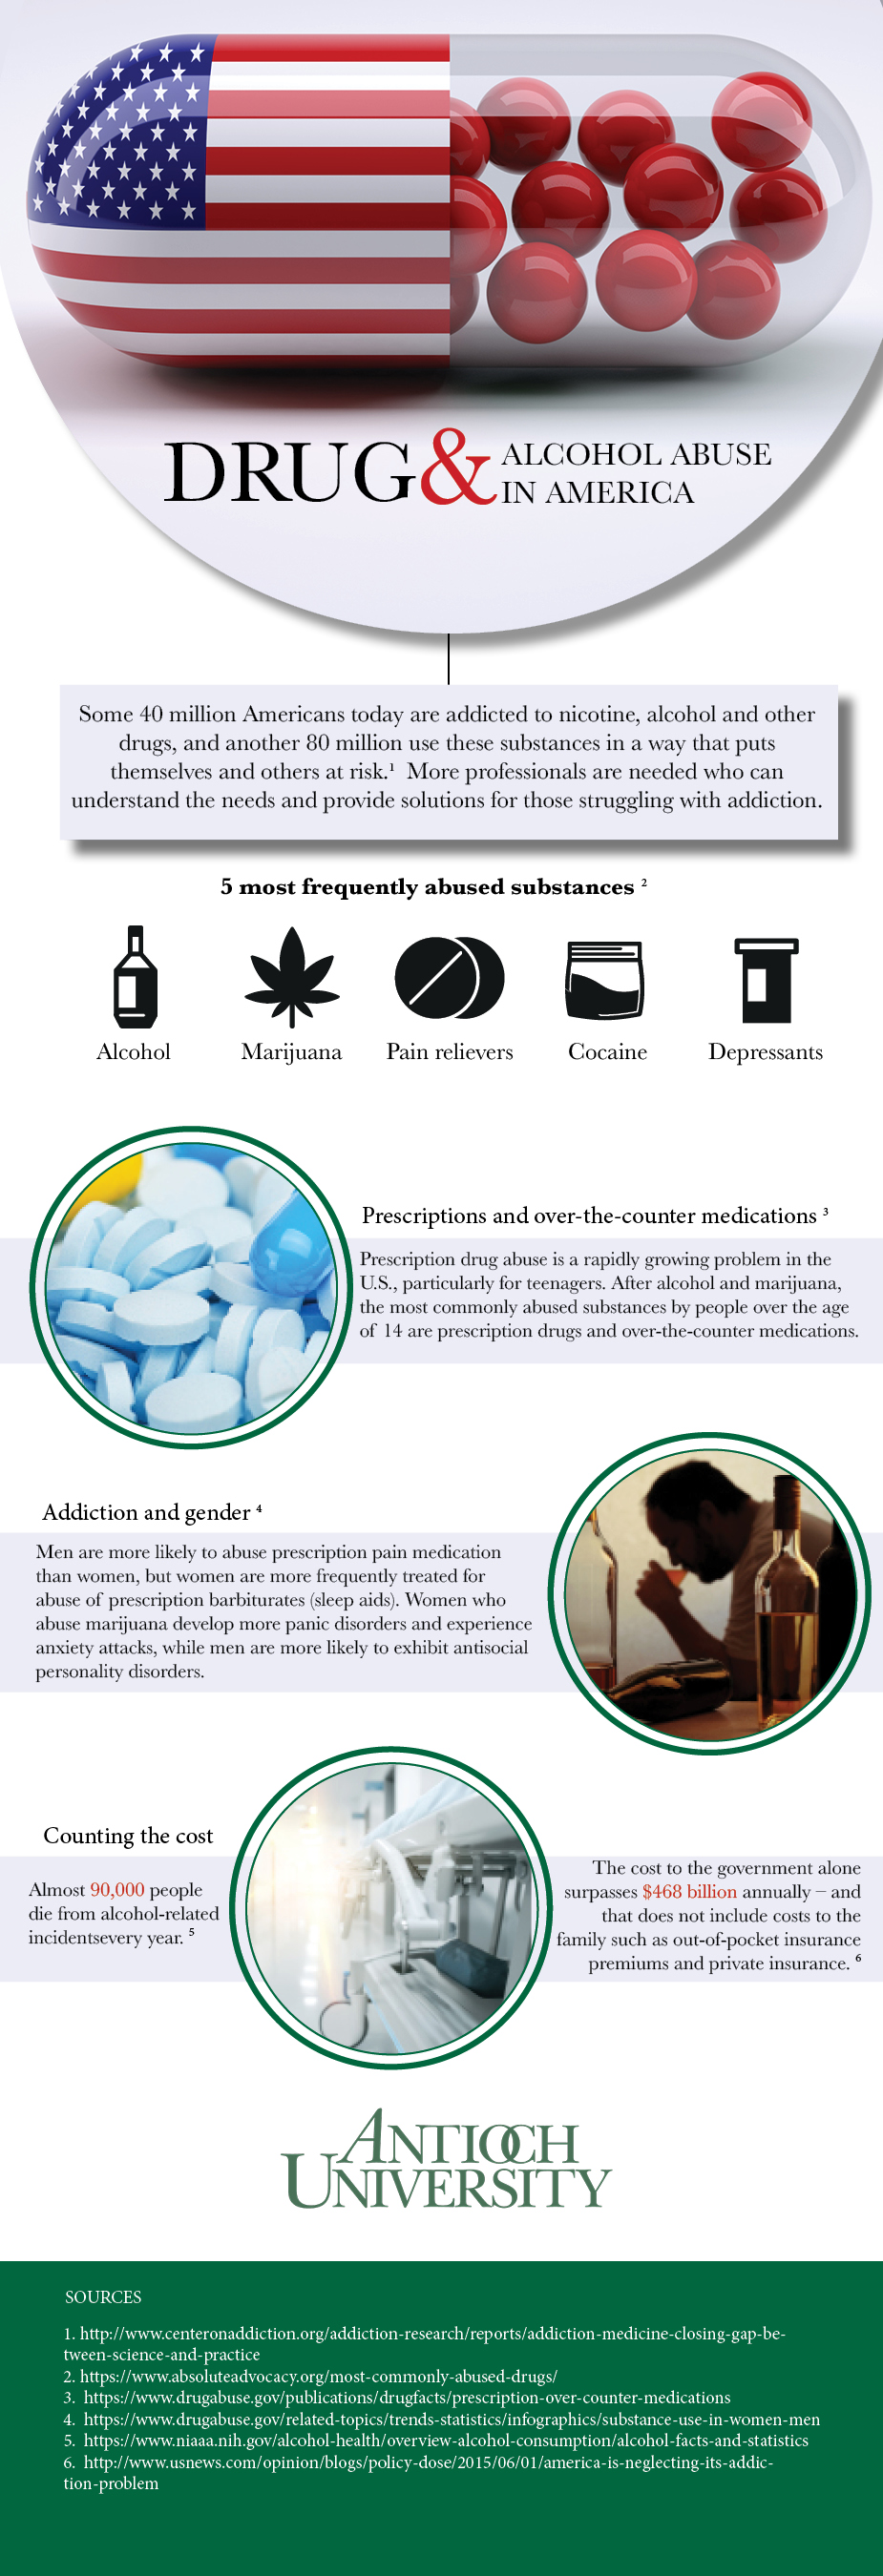 Drug and Alcohol Abuse in America